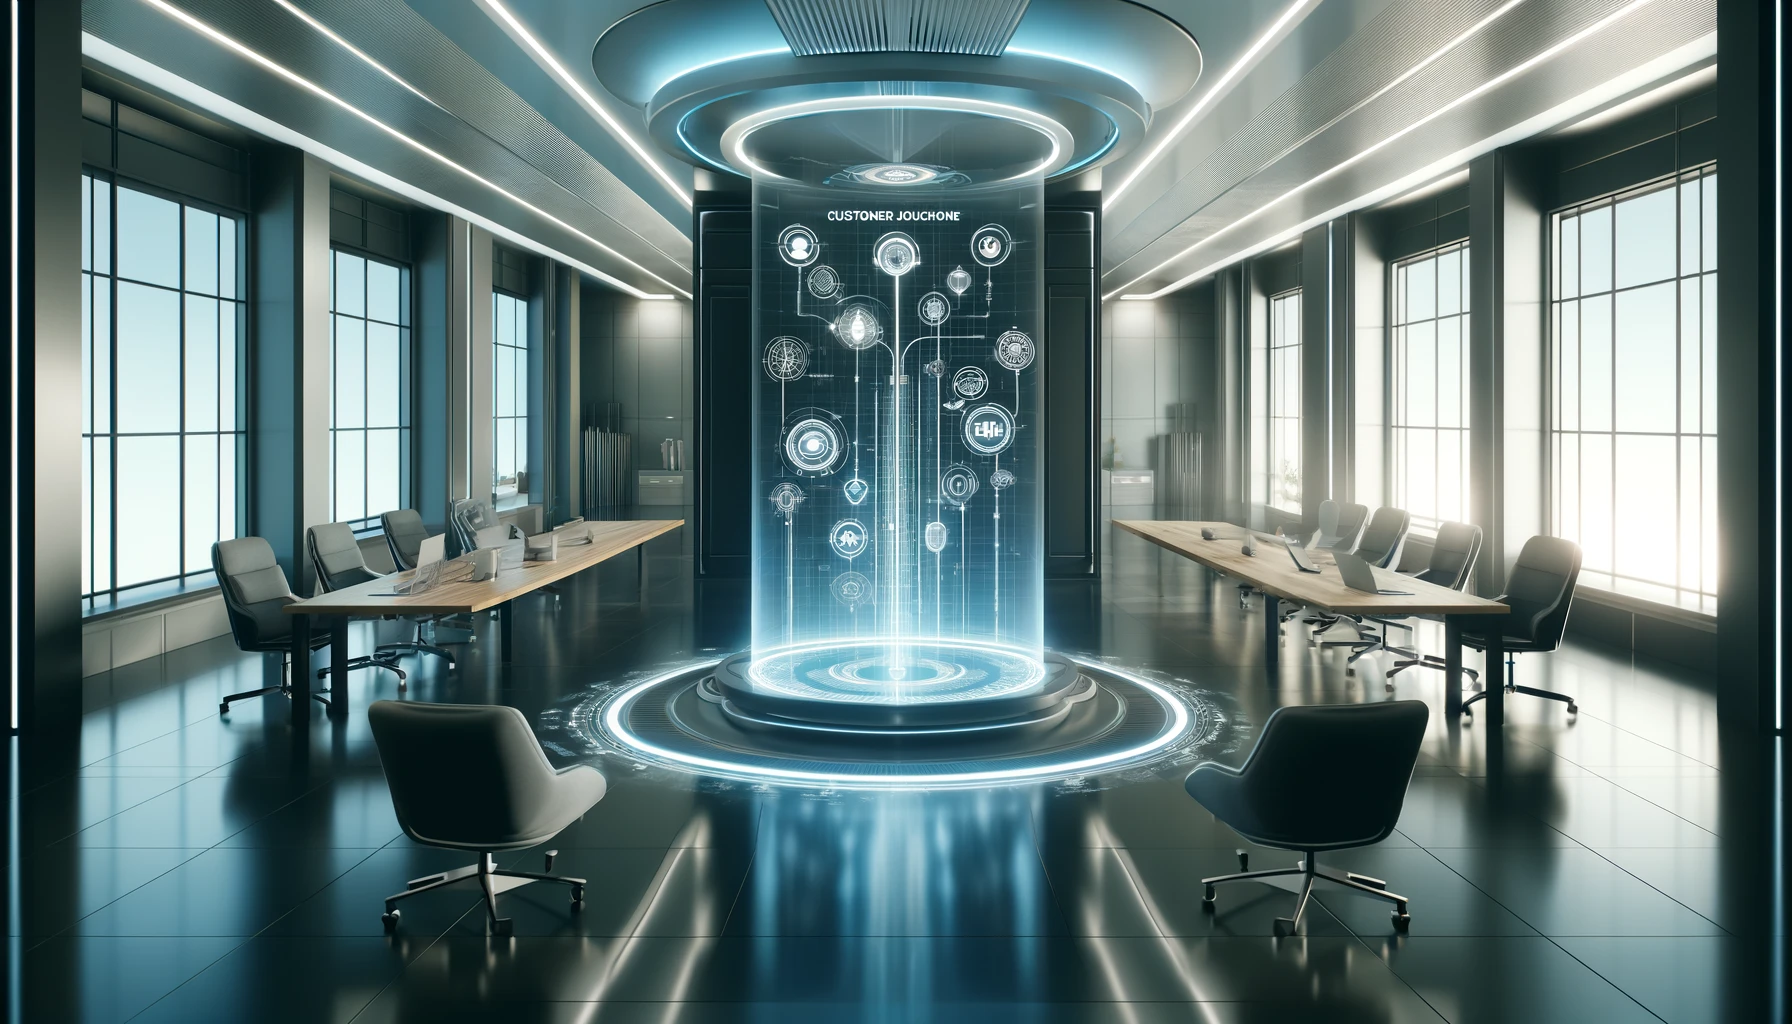 Modern and abstract office environment with a holographic display of a customer journey map, emphasizing strategic planning and innovation in customer touchpoints. The room features sleek, minimalist design and advanced technology, suitable for a business blog on CX prioritization.